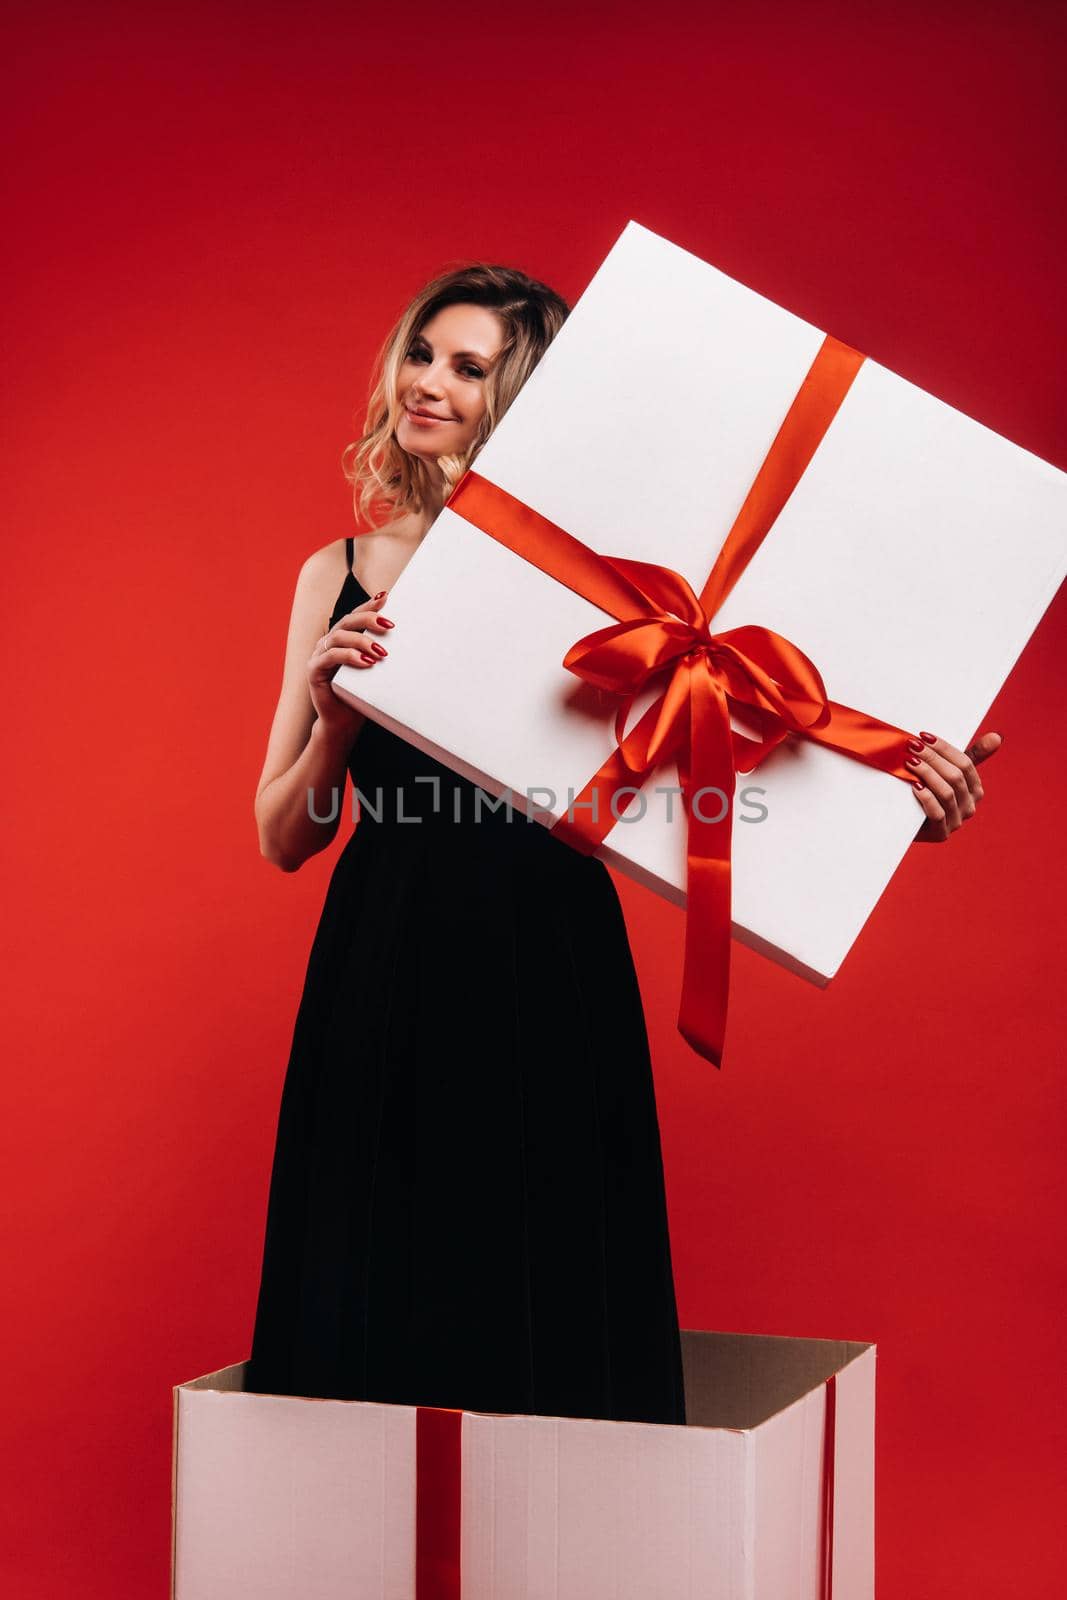 a girl in a black dress stands in a gift box on a red background.